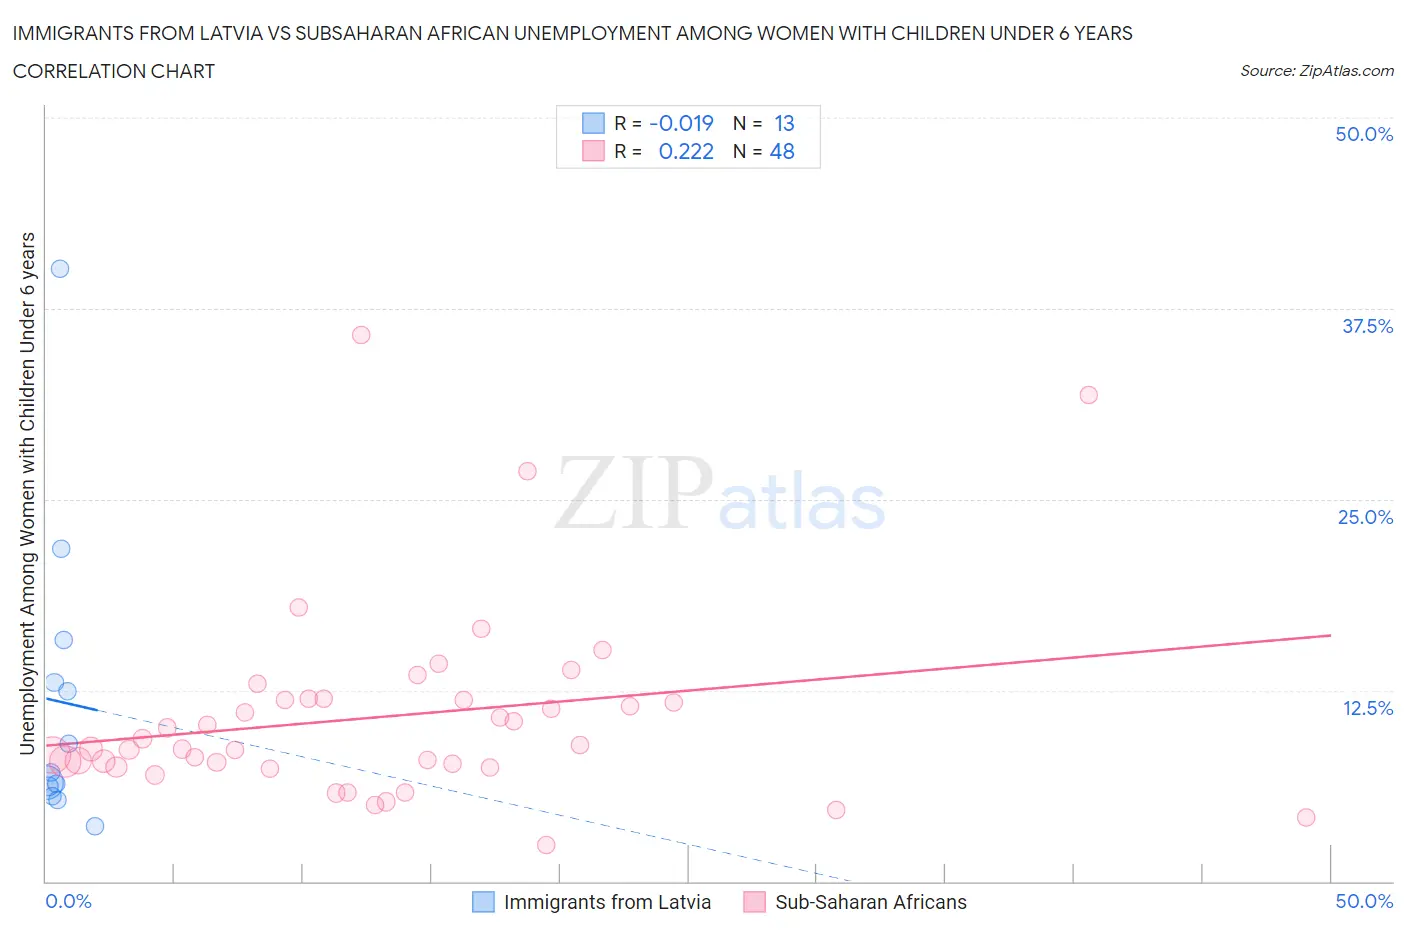 Immigrants from Latvia vs Subsaharan African Unemployment Among Women with Children Under 6 years